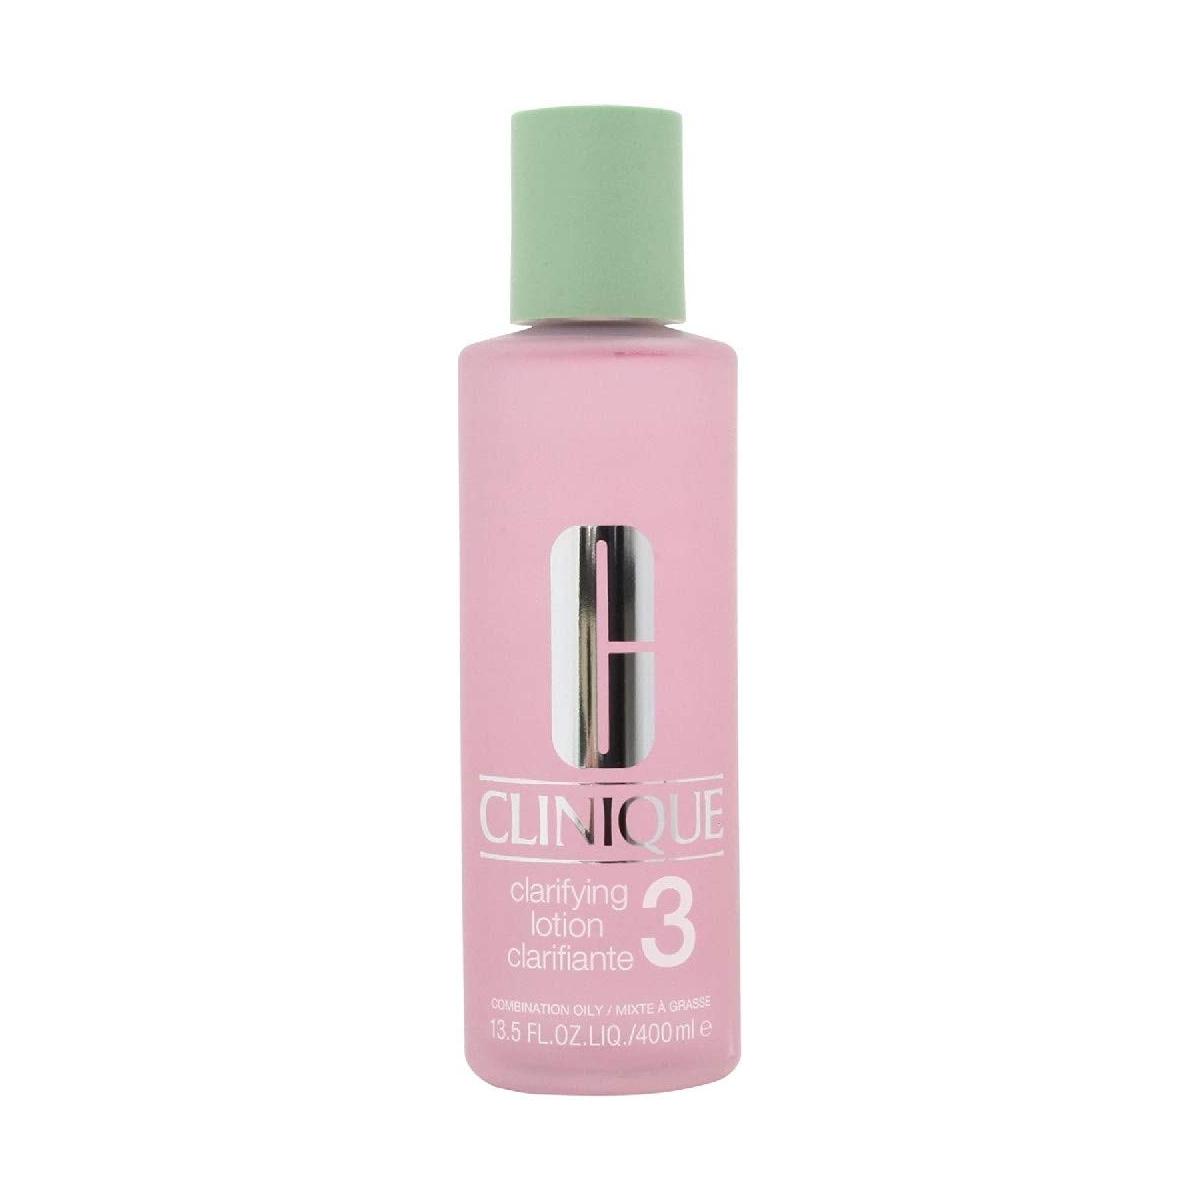 Clinique Clarifying lotion 3 400 ml